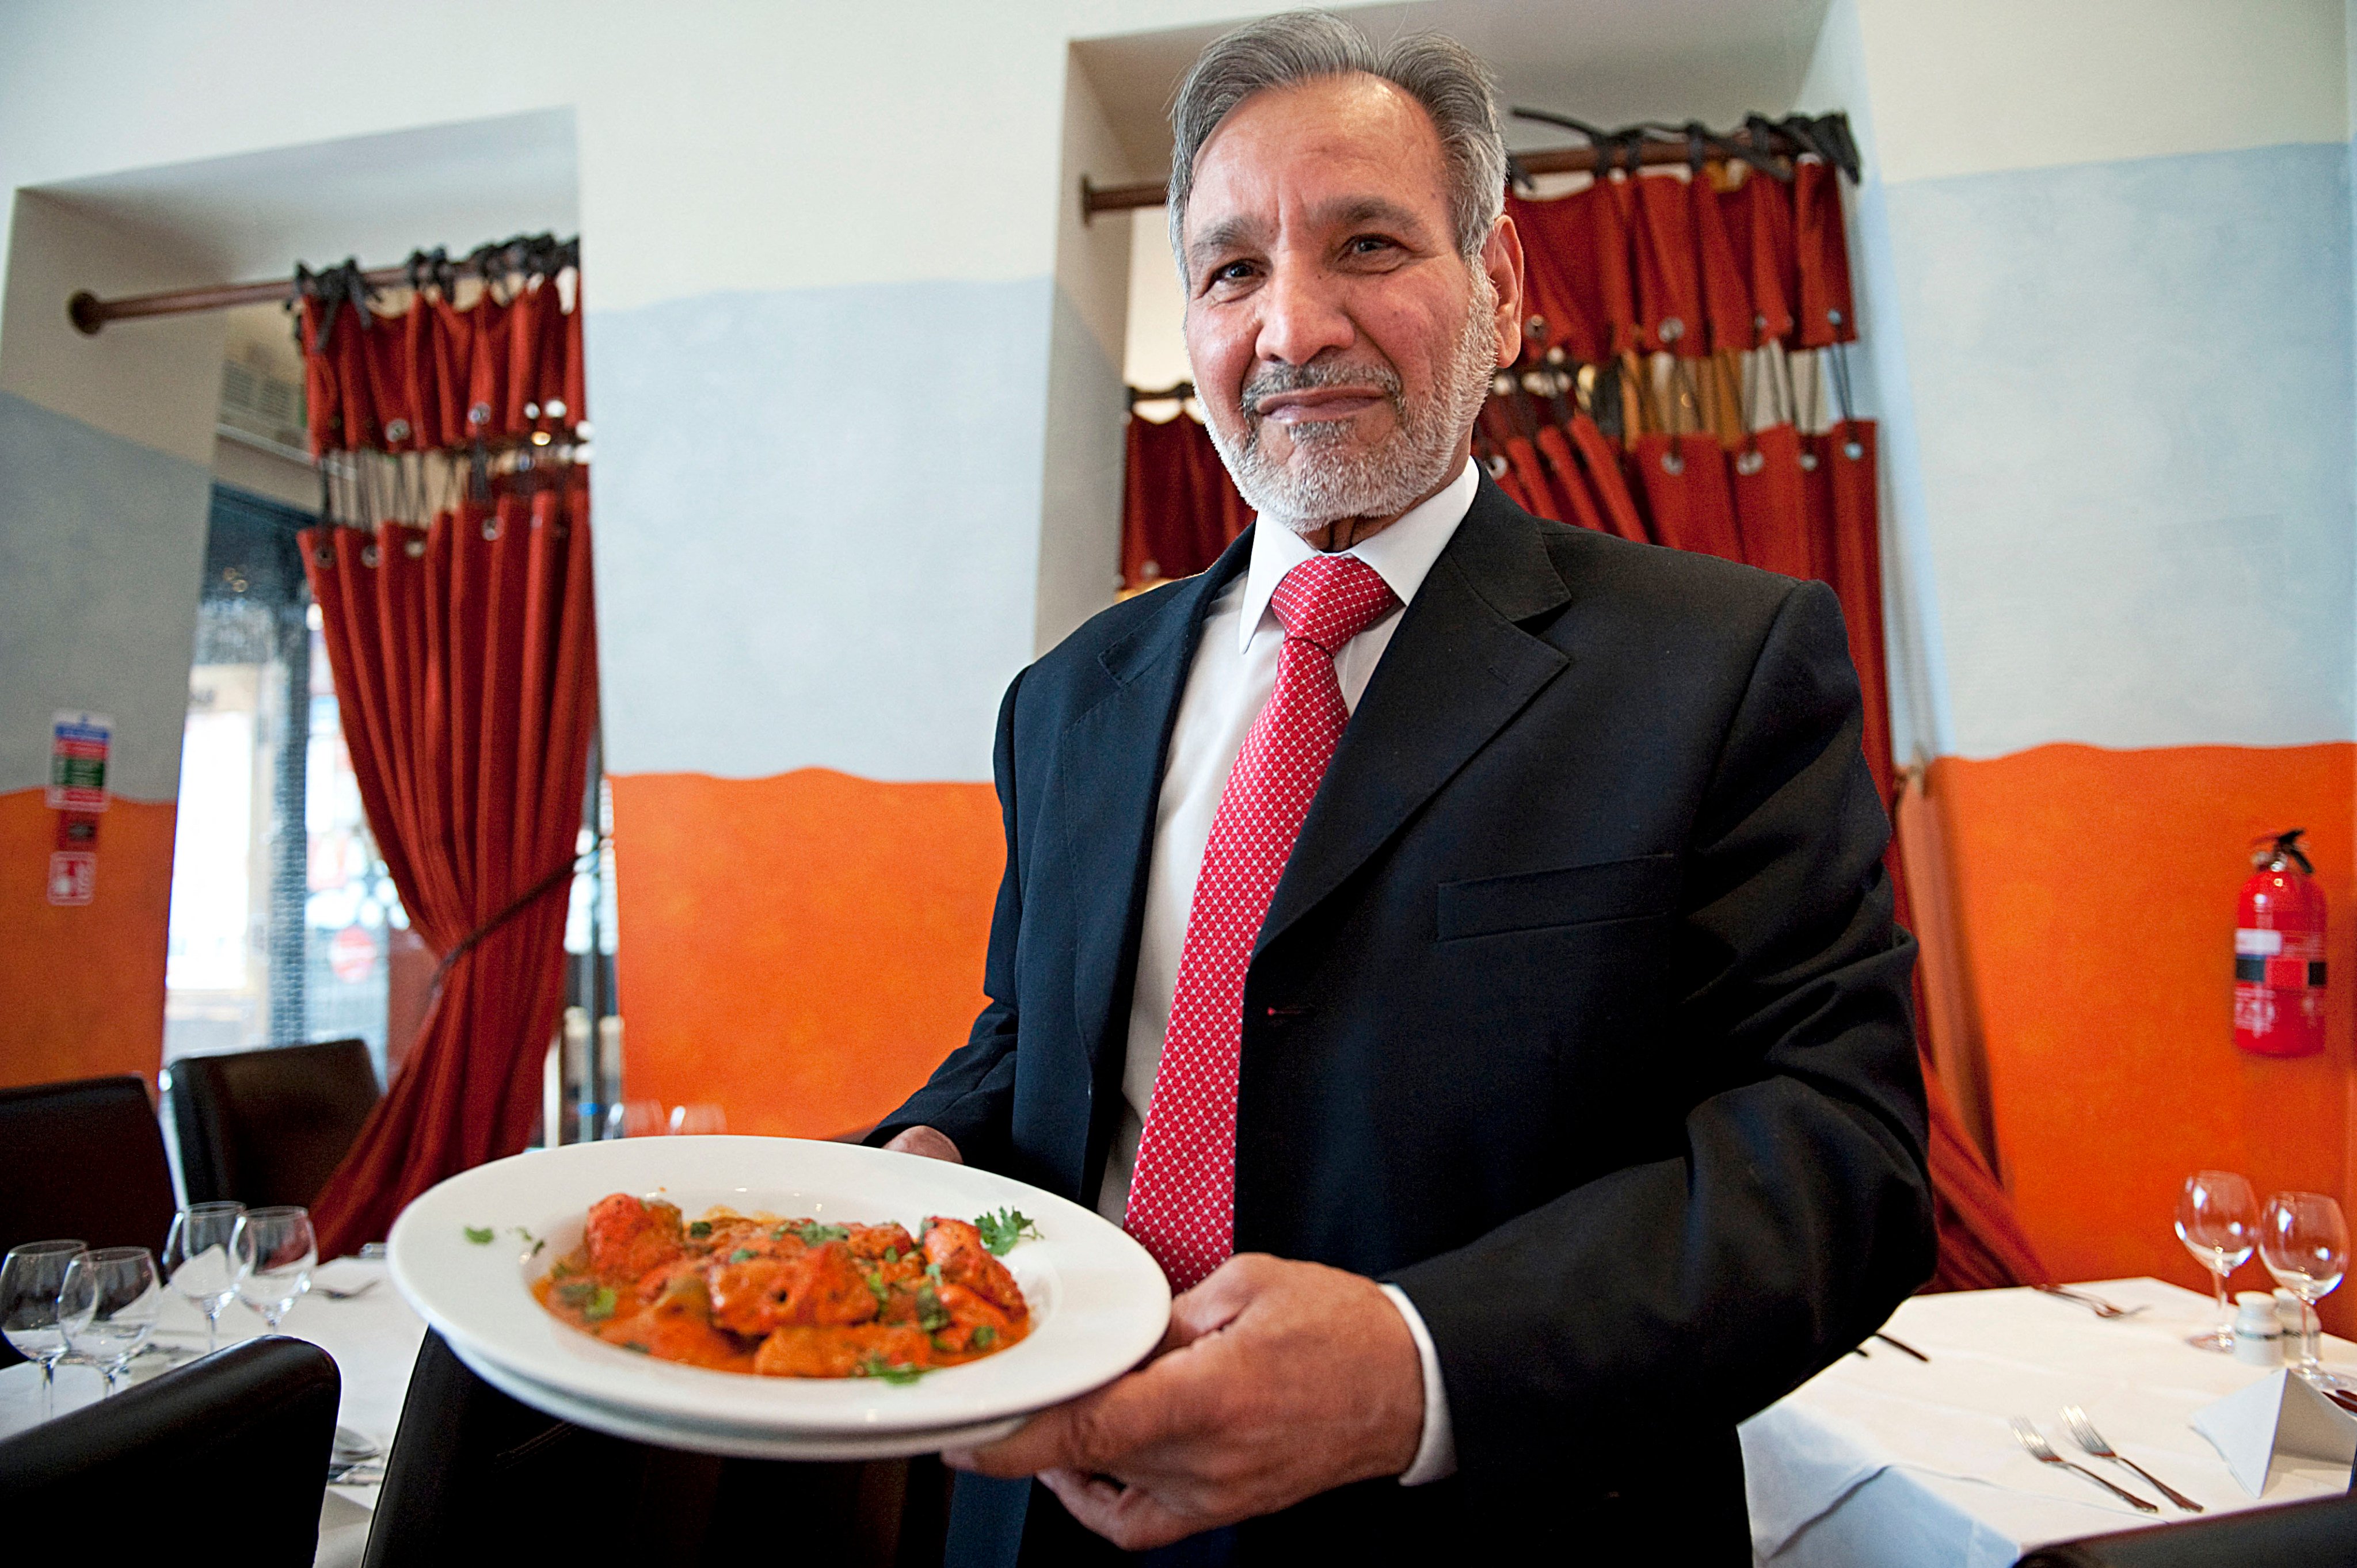 Ahmed Aslam Ali, the owner of the Shish Mahal restaurant in Glasgow, holds a plate of chicken tikka masala in his Shish Mahal restaurant in Glasgow, where he claims to have come up with the dish in the 1970s. Photo: AFP